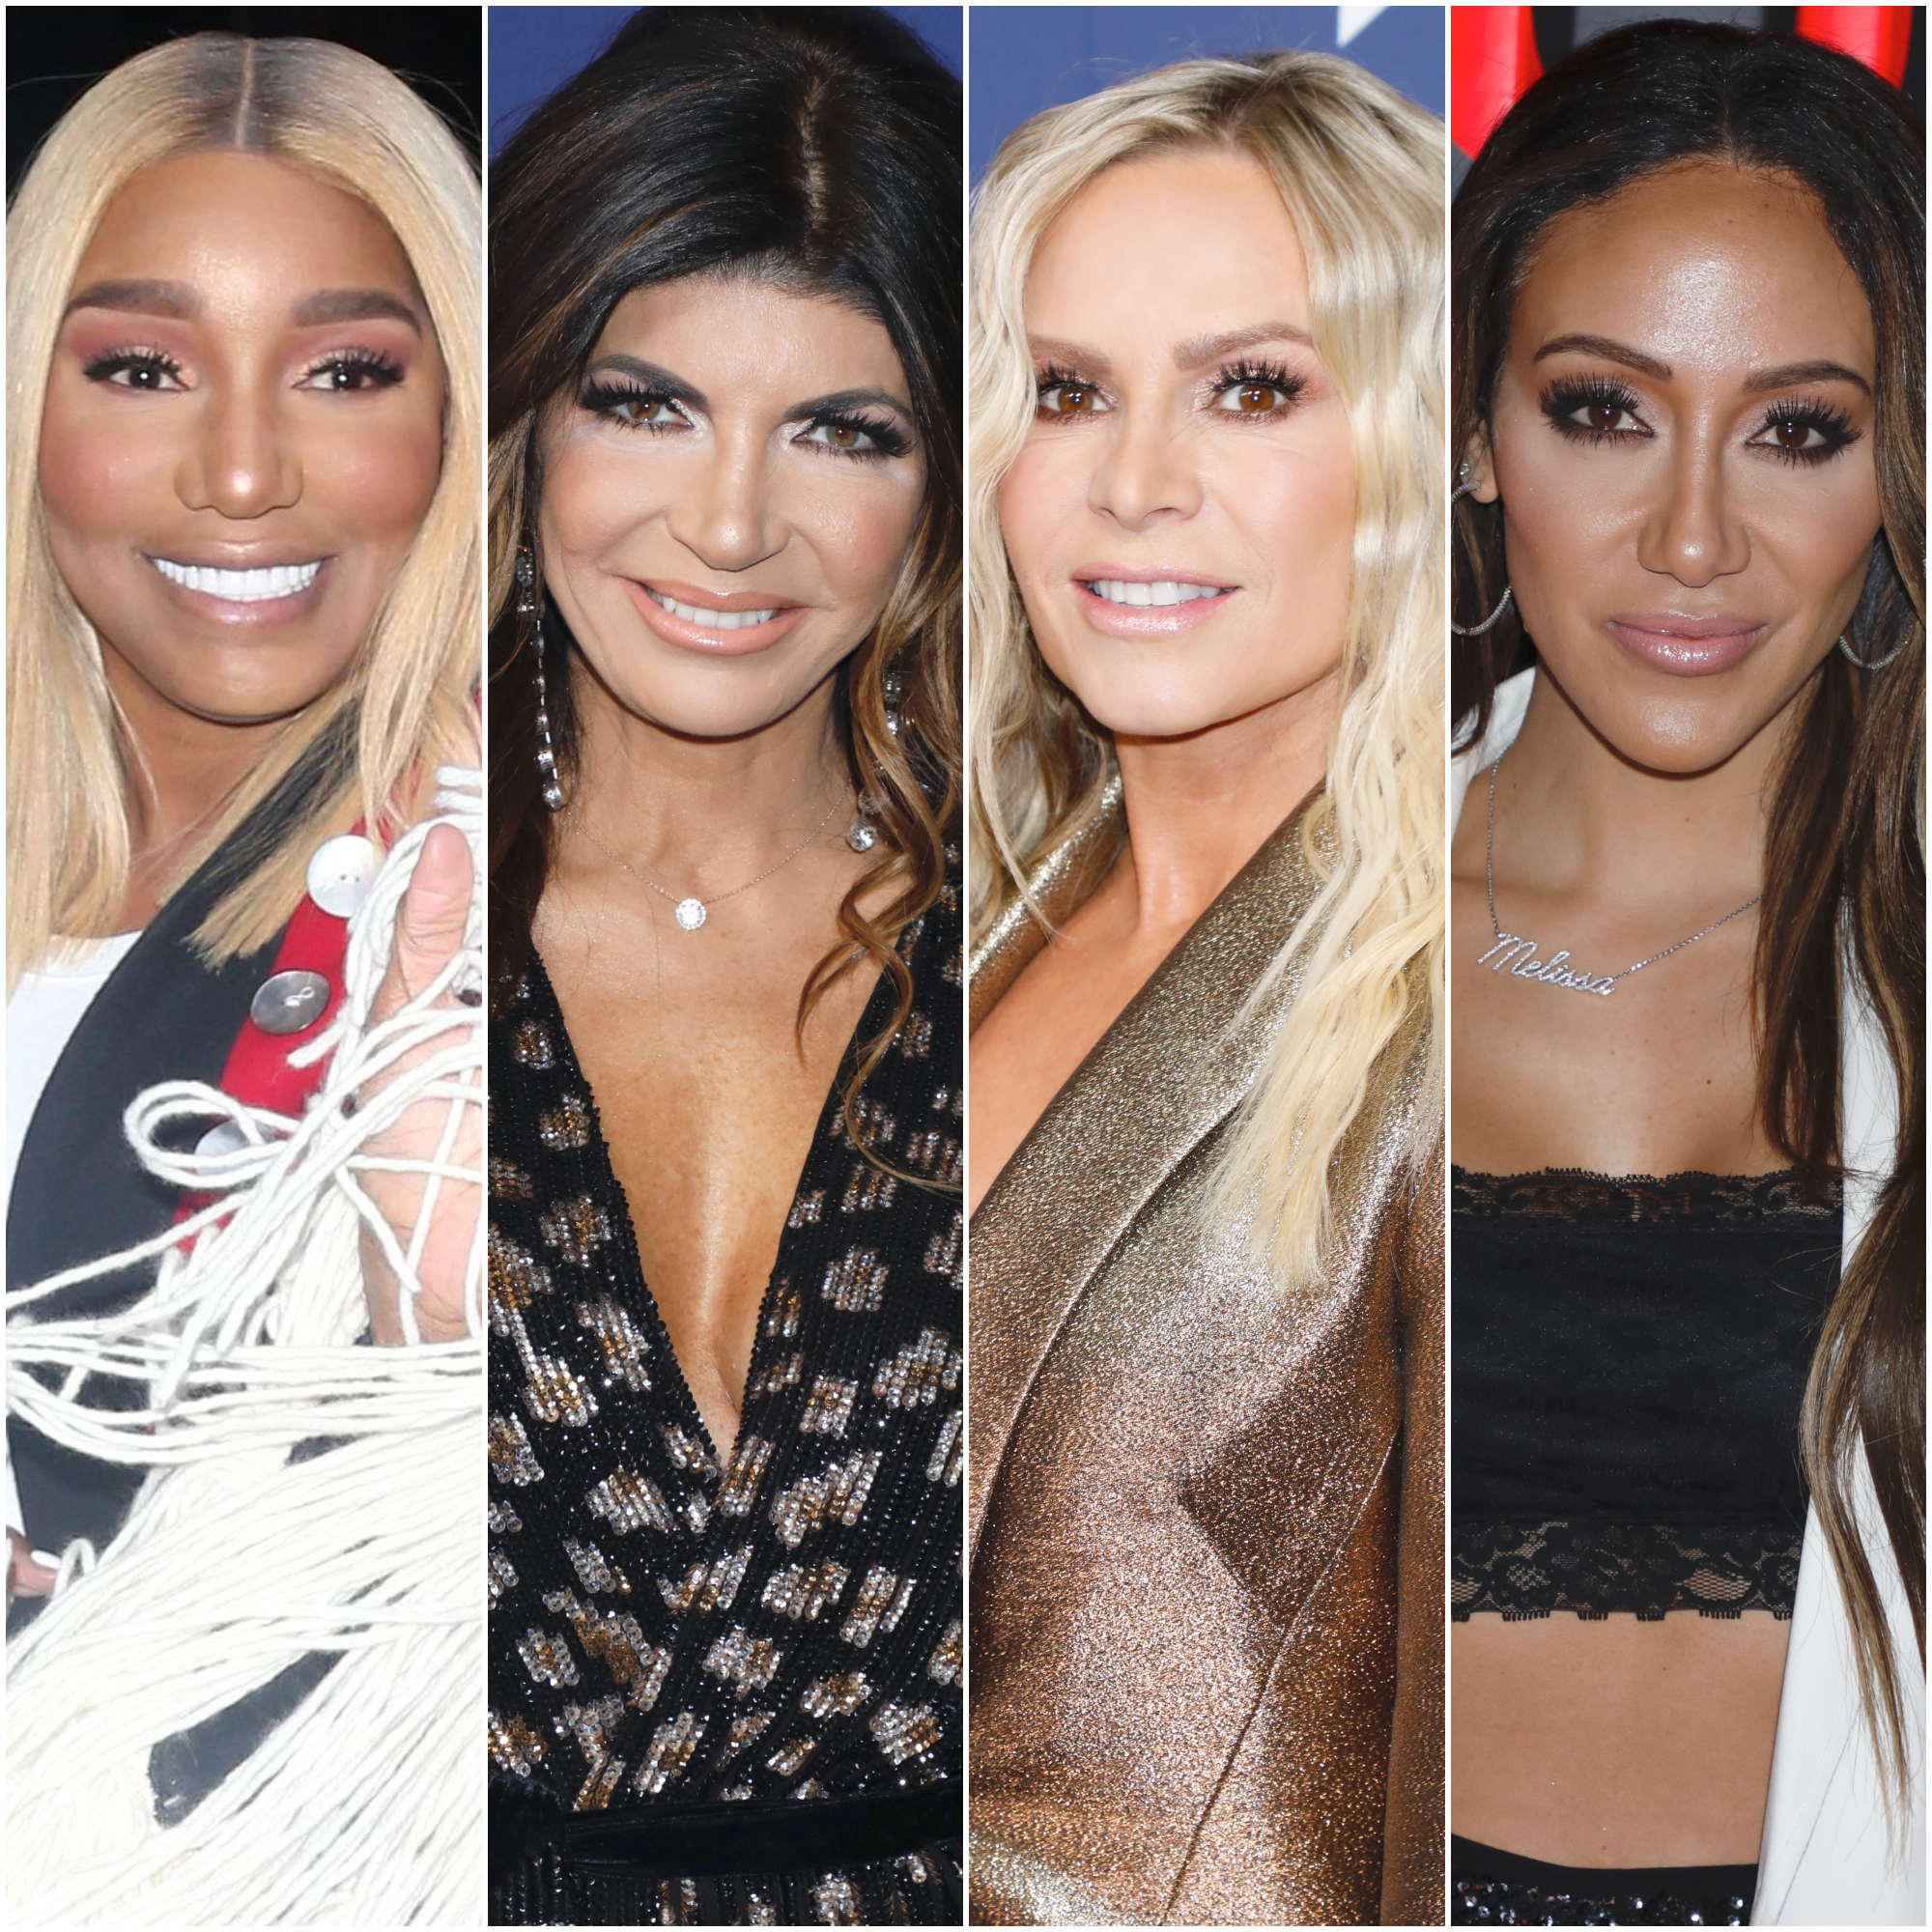 Real Housewives' Plastic Surgery: See Who Got Work Done